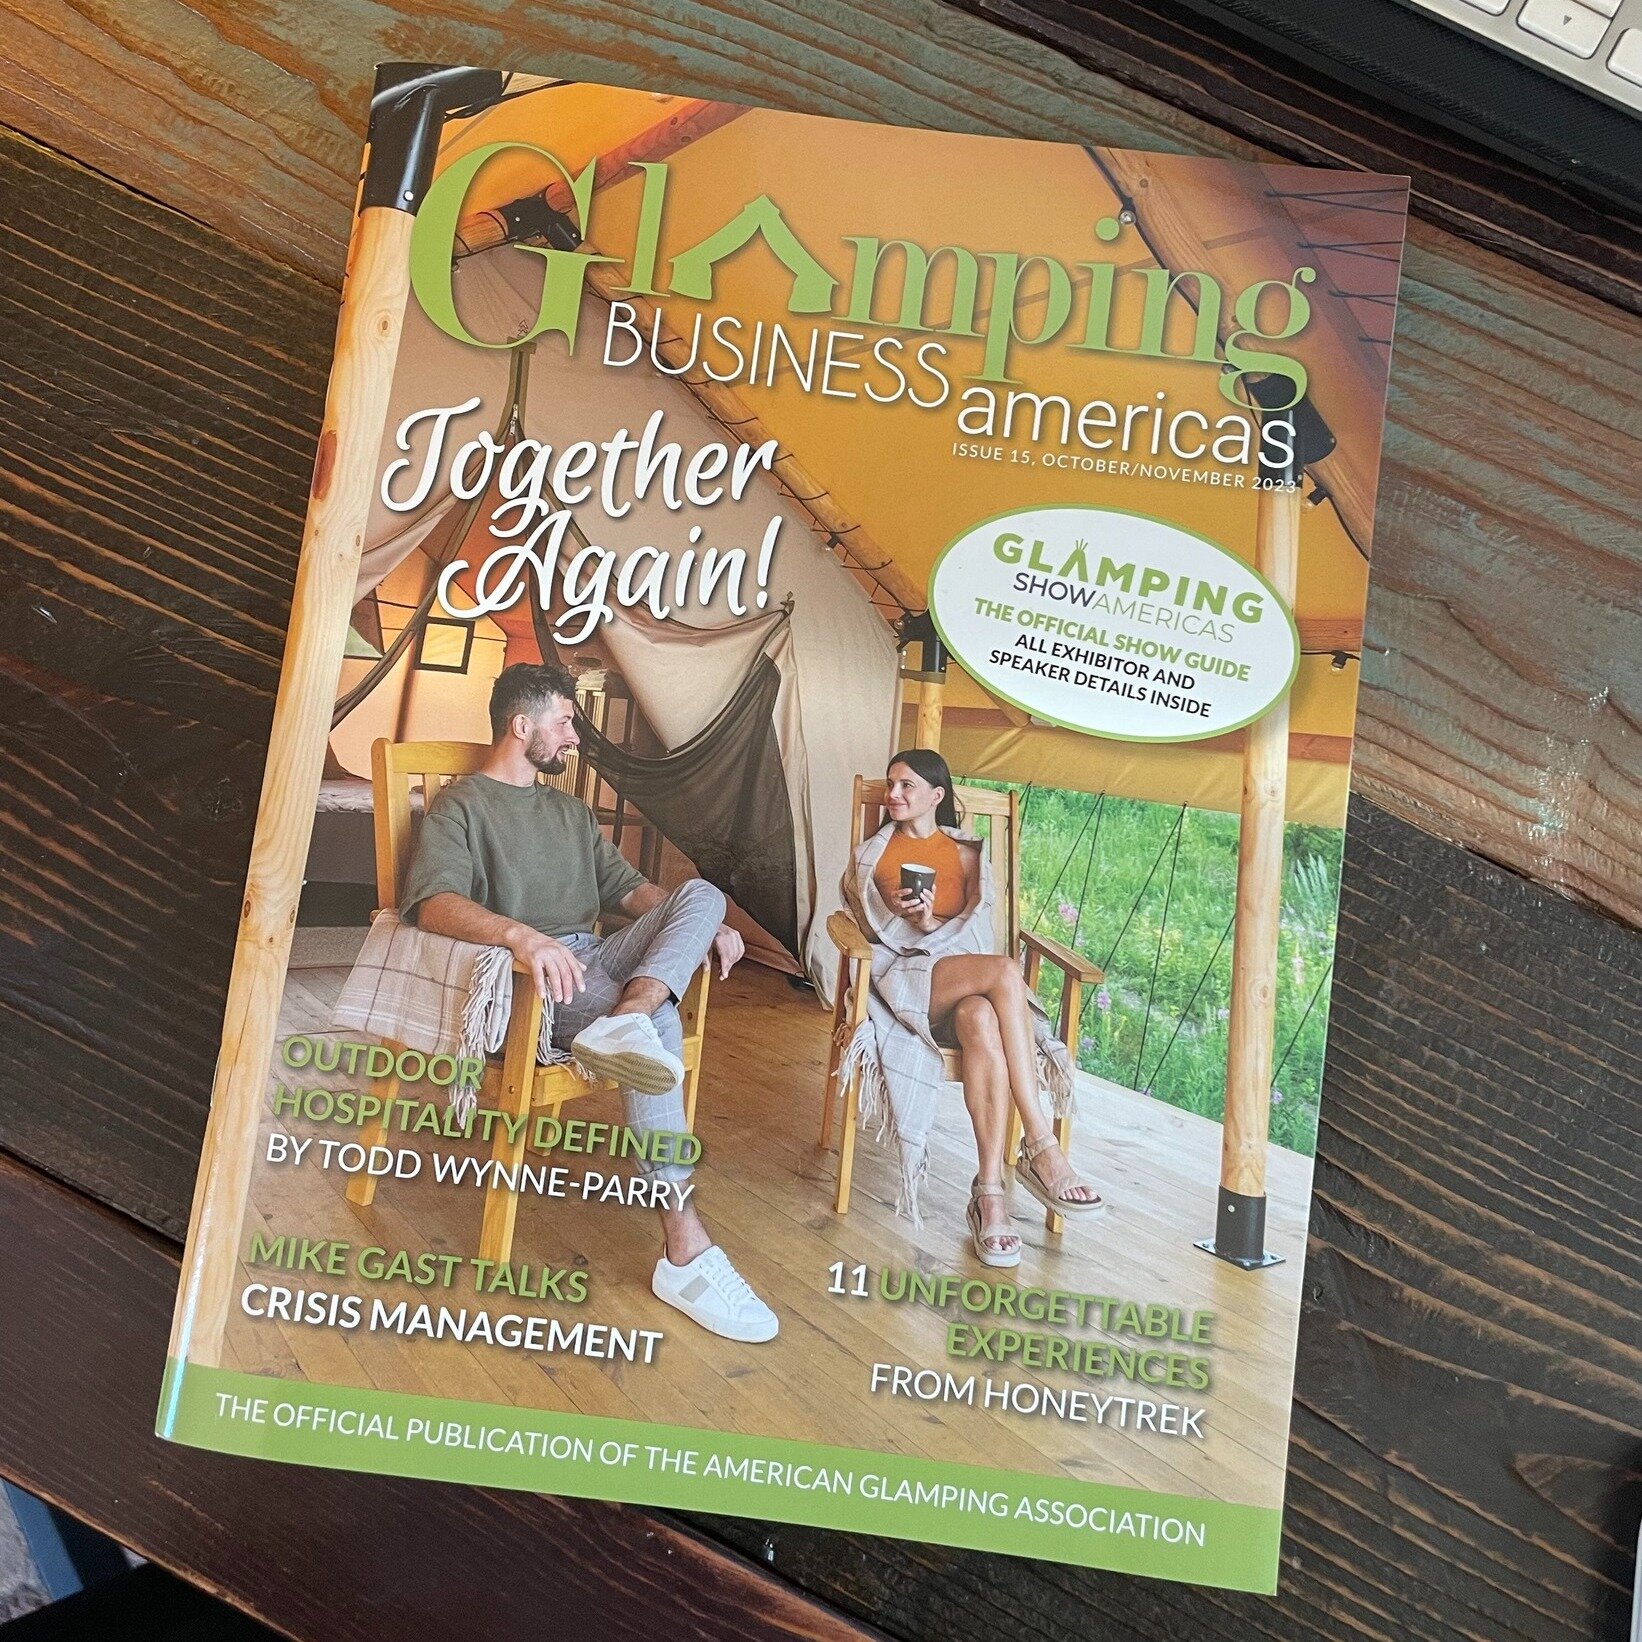 TIP OF THE DAY: Sign up for a FREE subscription to the Glamping Business Americas Magazine! 

It's an awesome resource, full of topics aimed to educate and inspire glamping business operators. A link to a digital copy will arrive in your inbox 4x/yea